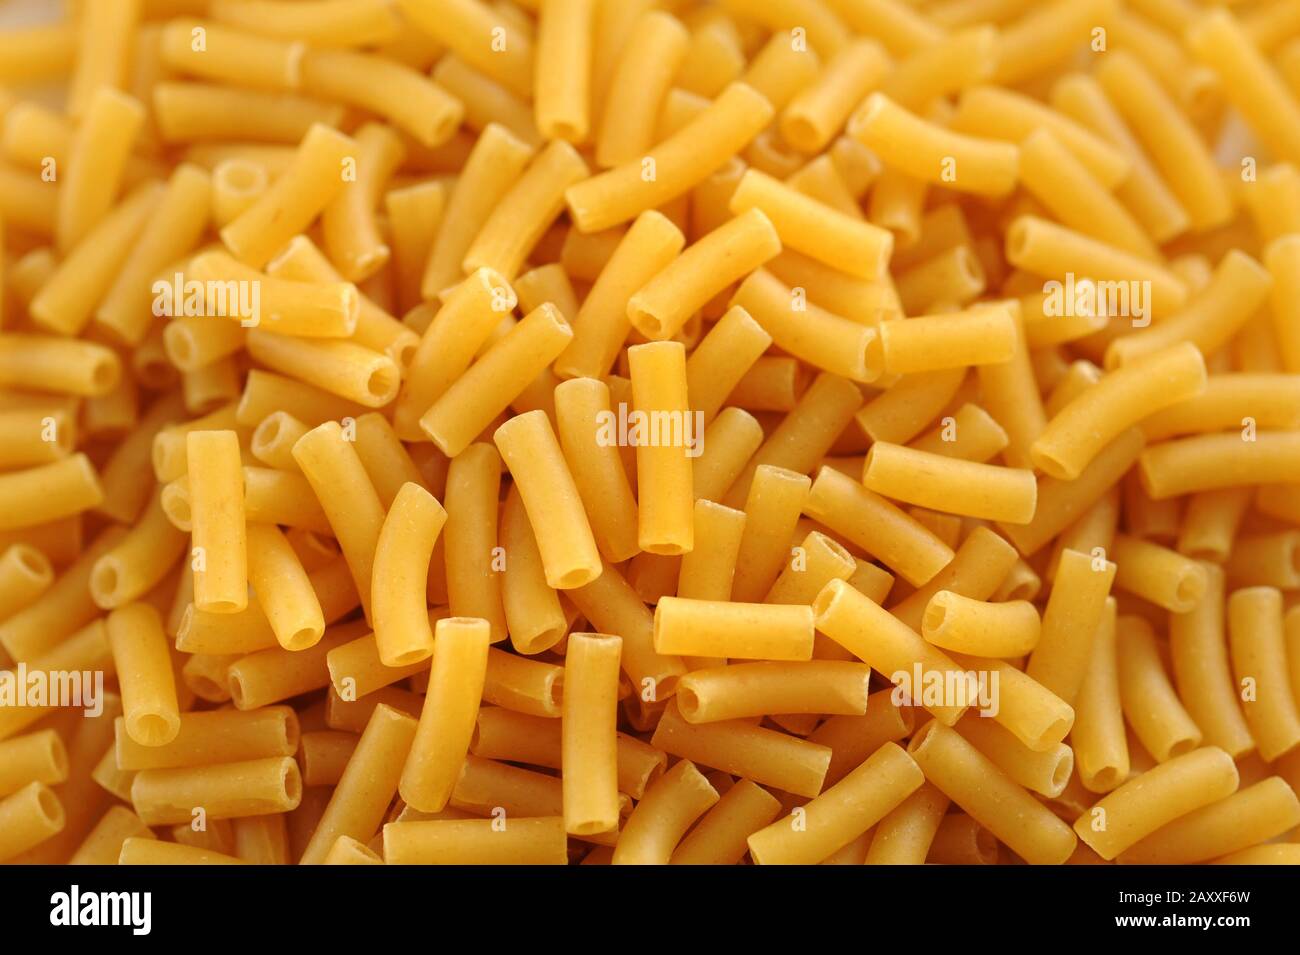 Macaroni background texture with a heap of dried pasta tubes in a full frame view for Italian and Mediterranean cuisine Stock Photo